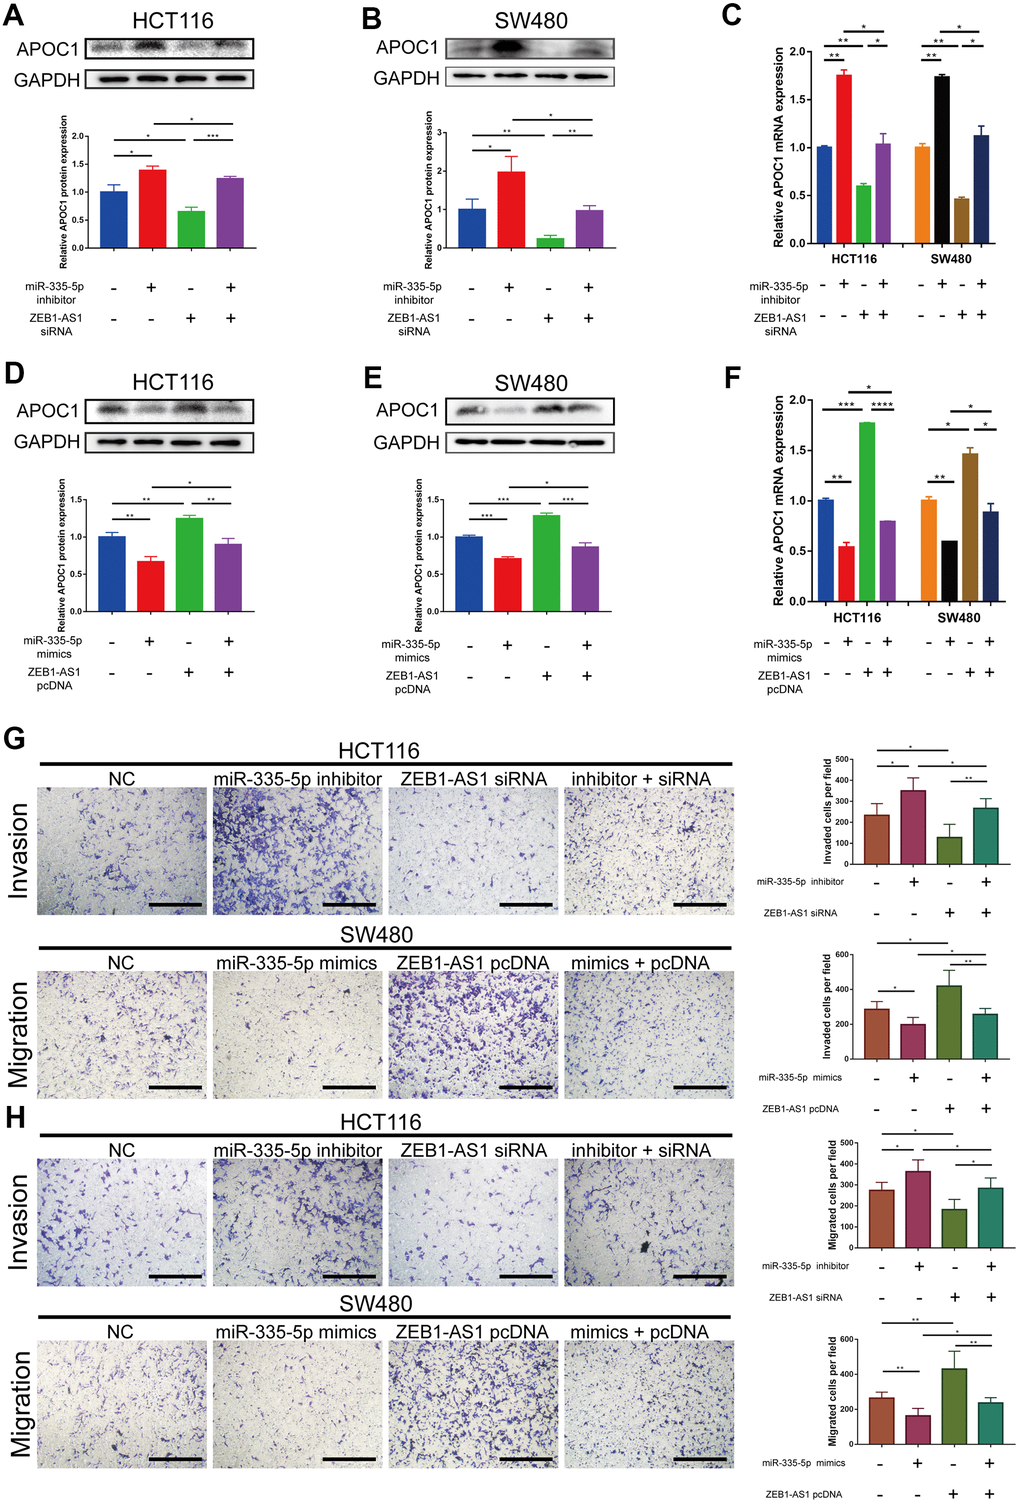 ZEB1-AS1 regulates APOC1 expression by competing for miR-335-5p to promote CRC cells invasion and migration. (A–C) miR-335-5p inhibitor abolished effects of ZEB1-AS1 downregulation on APOC1 expression in HCT116 and SW480 cells. All expression levels were detected by western blotting and RT-qPCR. Representative immunoblots and the ratios of the indicated proteins to GAPDH are presented. (D–F) ZEB1-AS1 overexpression eliminated the effects of miR-335-5p mimics on APOC1 expression in HCT116 and SW480 cells. All expression levels were detected by western blotting and RT-qPCR. Representative immunoblots and the ratios of the indicated proteins to GAPDH are presented. (G, H) miR-335-5p inhibitor rescued the effects of ZEB1-AS1 downregulation on HCT116 cell invasion and migration, and ZEB1-AS1 overexpression rescued the effects of miR-335-5p mimics on SW480 cell invasion and migration (Scale bar: 100 μm). *p 